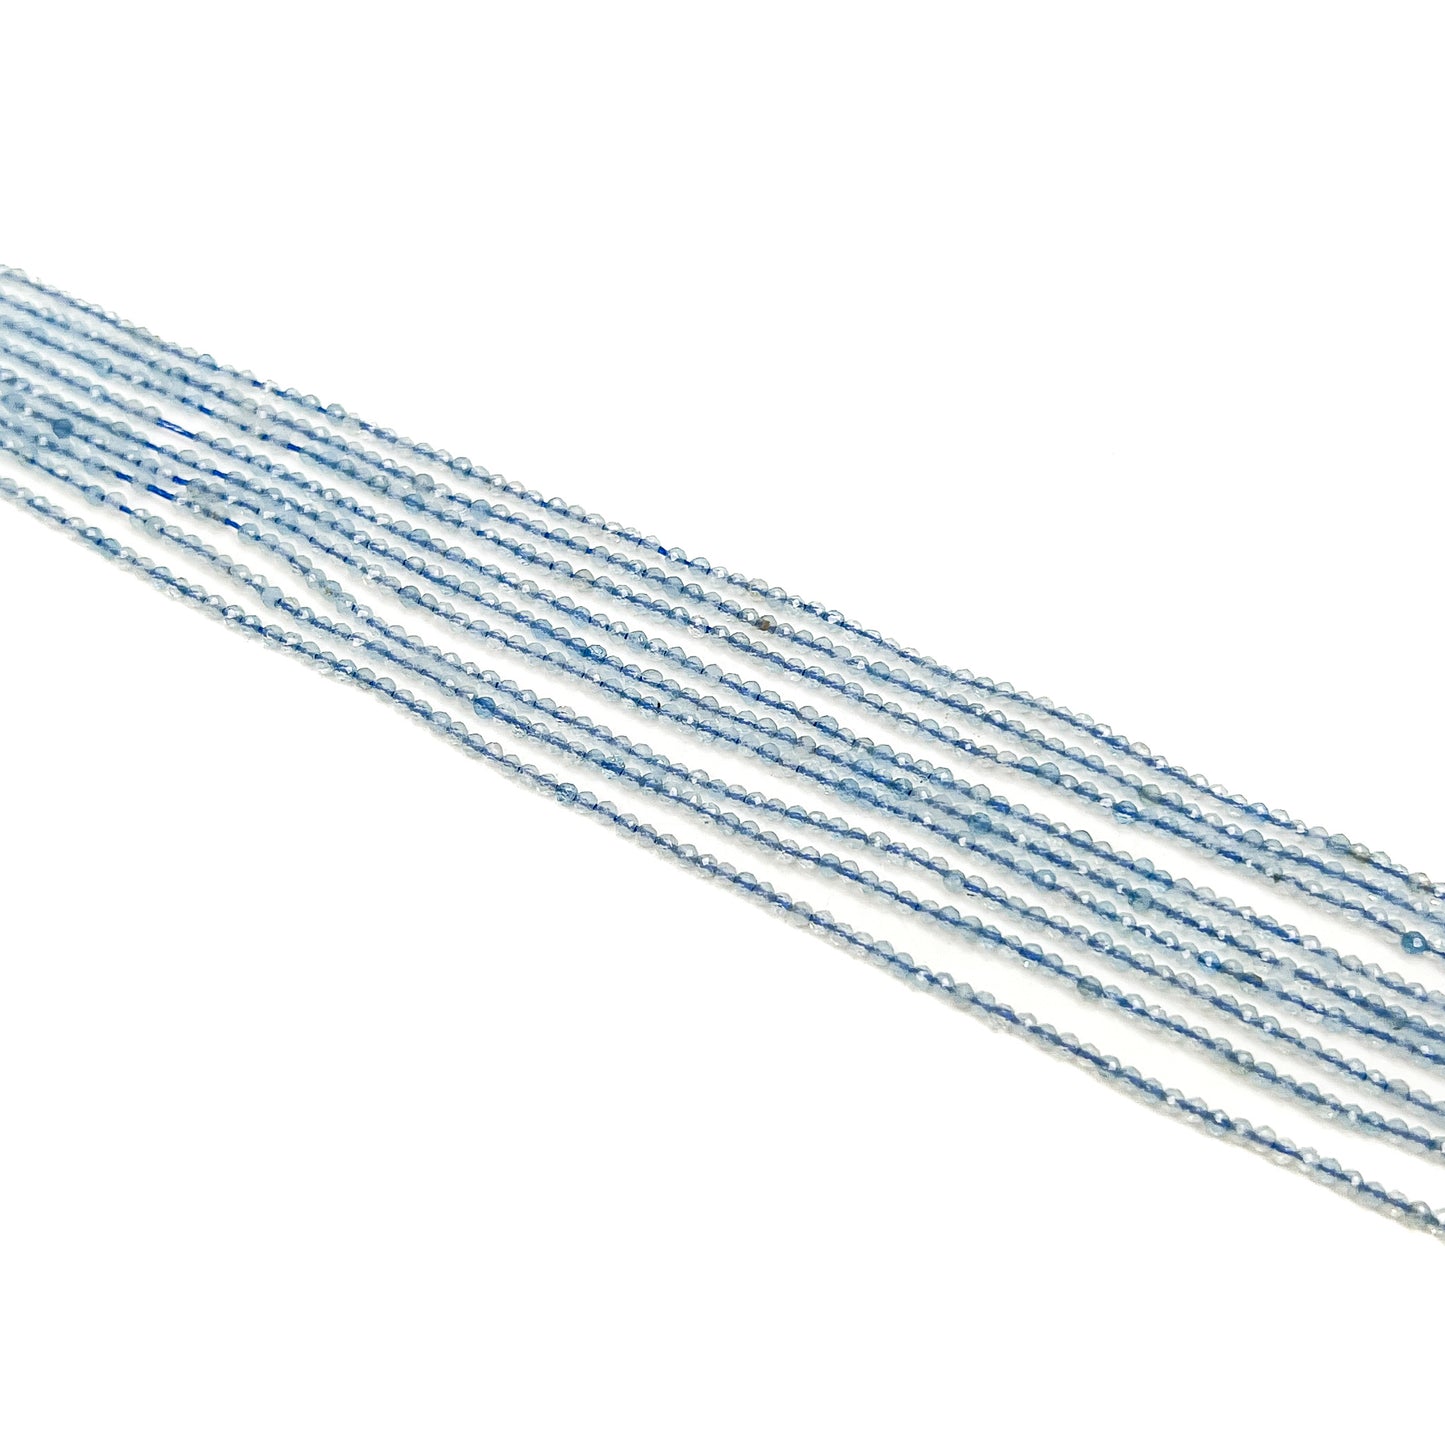 Aquamarine 2mm Faceted Round Bead Strand - (2 Quantities Available)